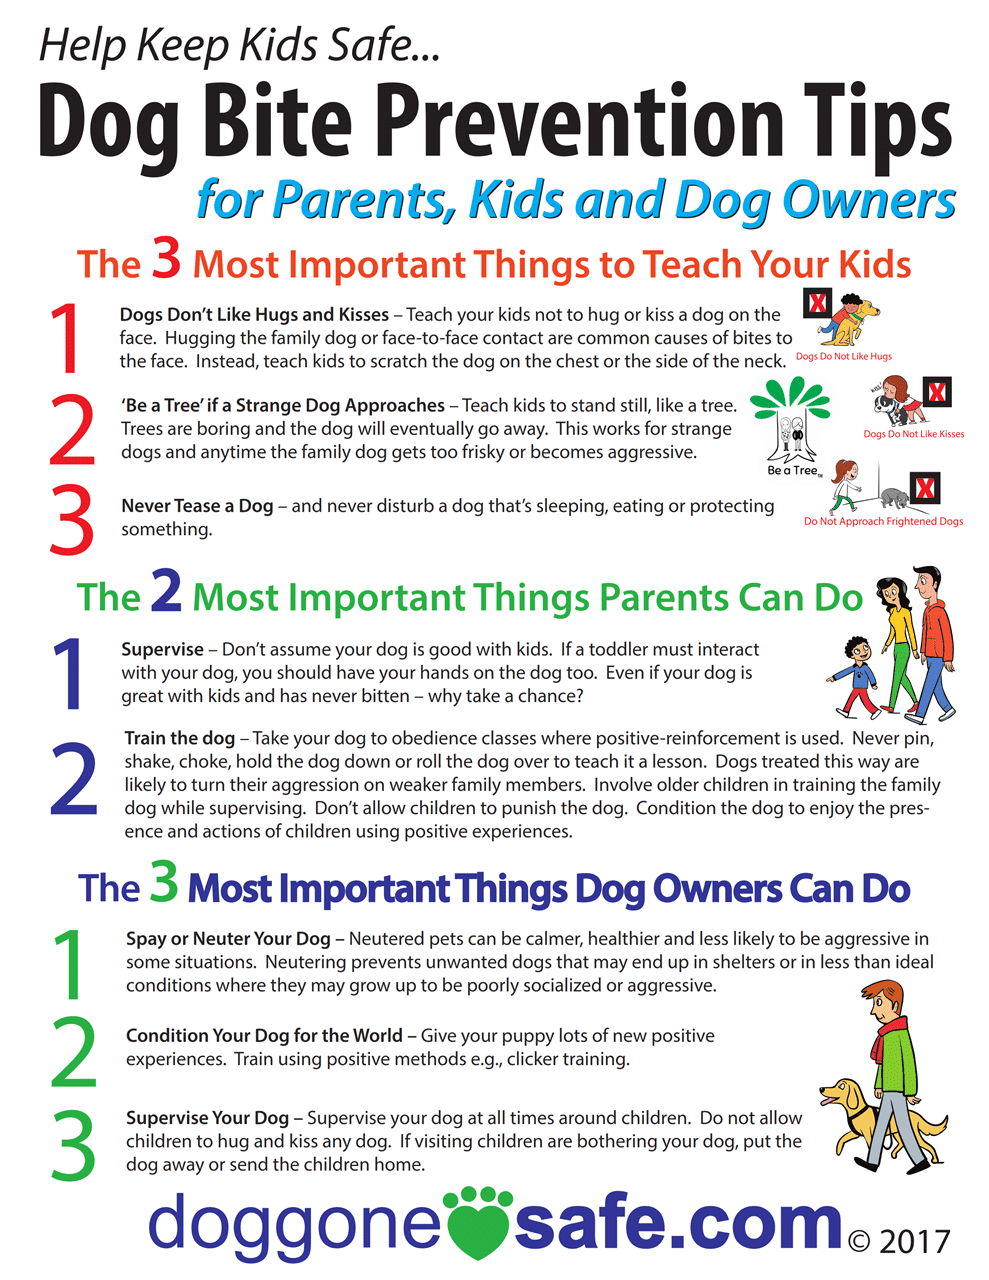 Dog Bite Prevention for Parents, Kids and Dog Owners